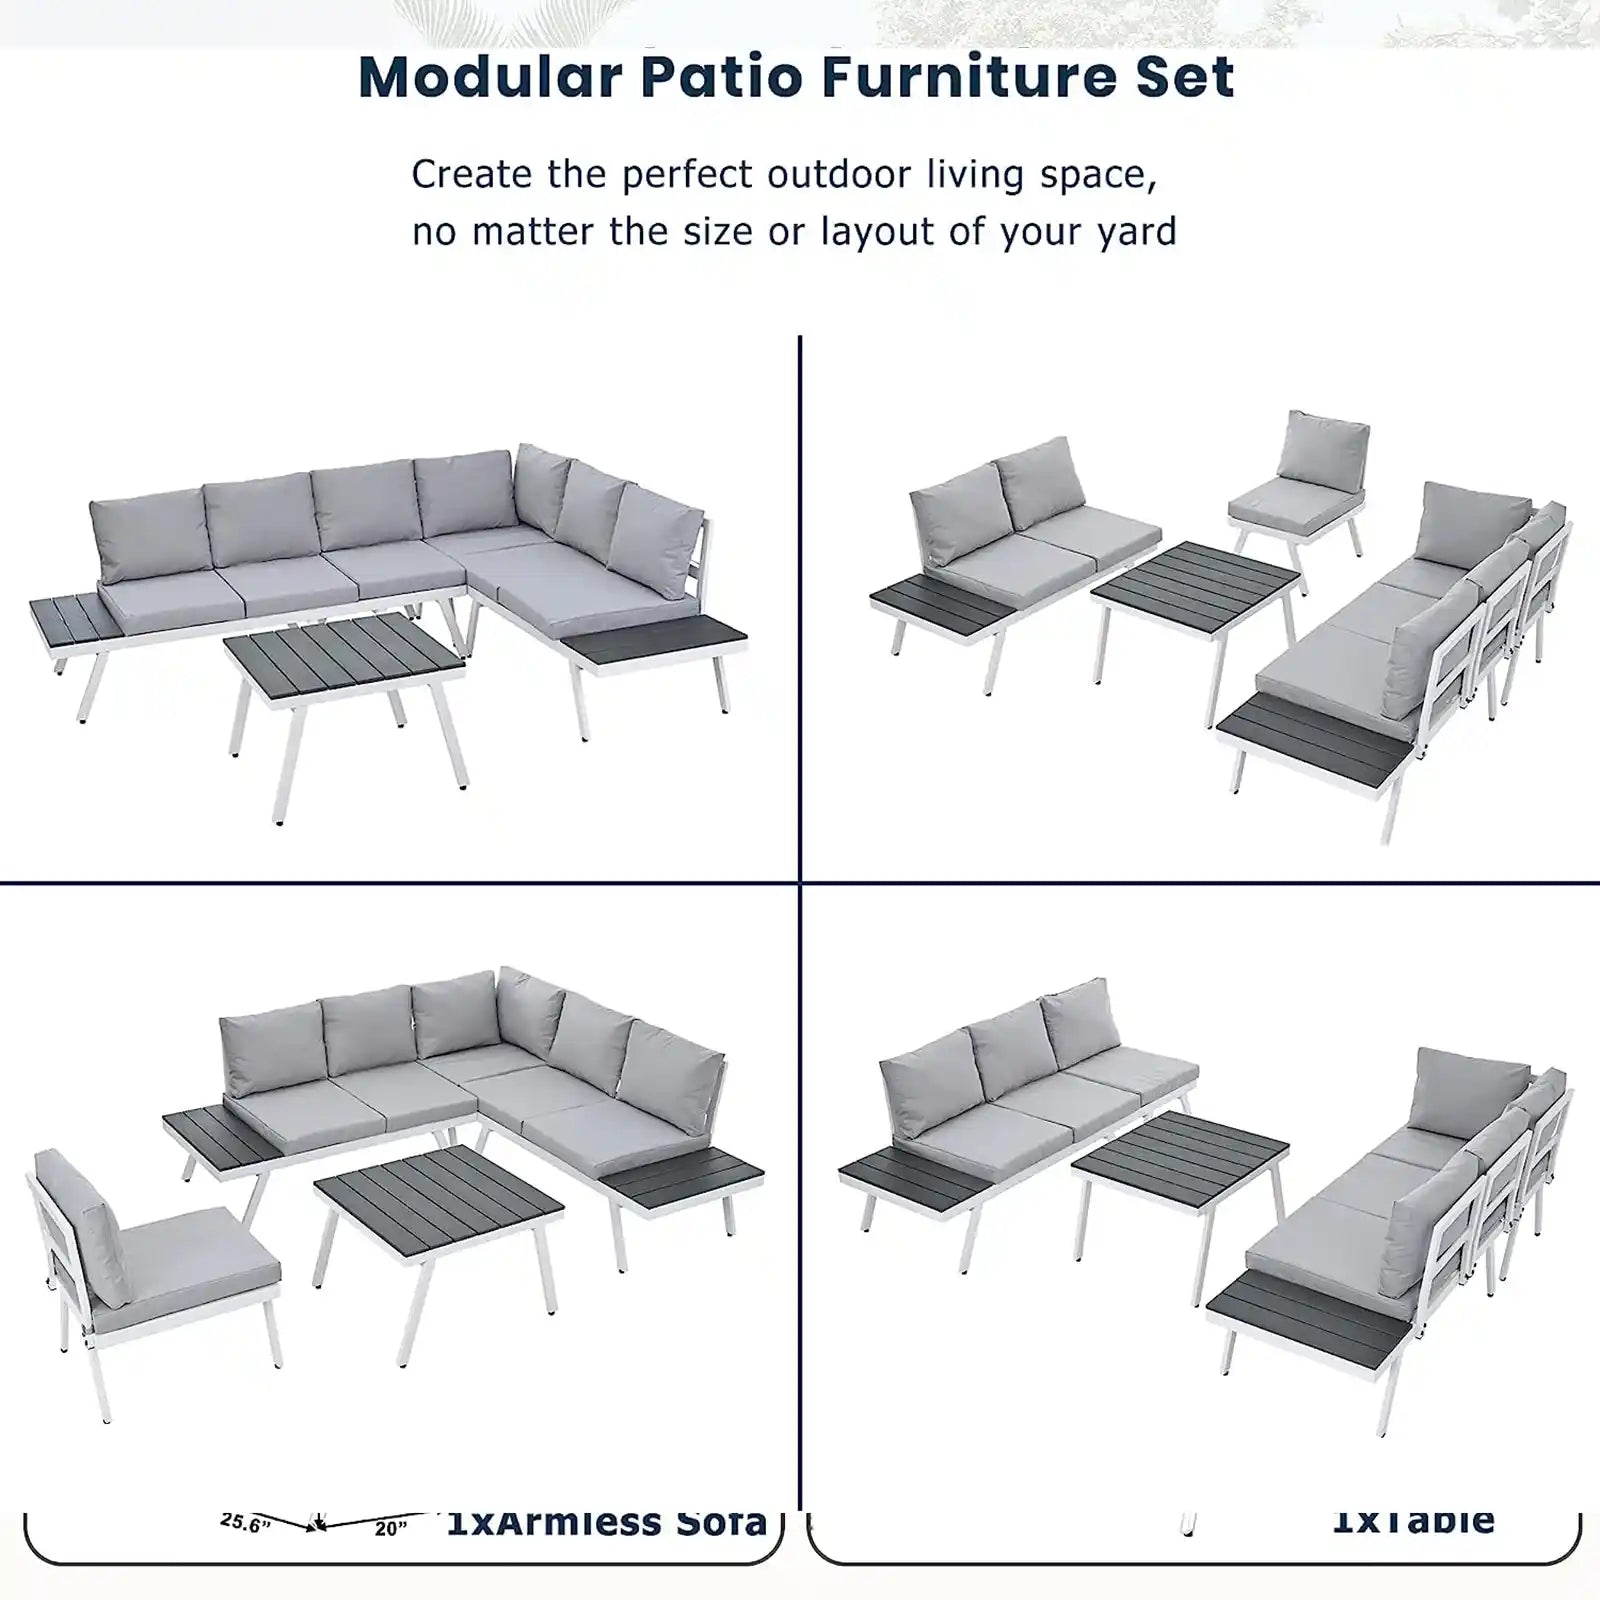 Industrial 5-Piece Aluminum Outdoor Patio Furniture Set, Modern Garden Sectional Sofa Set with End Tables, Coffee Table and Furniture Clips for Backyard